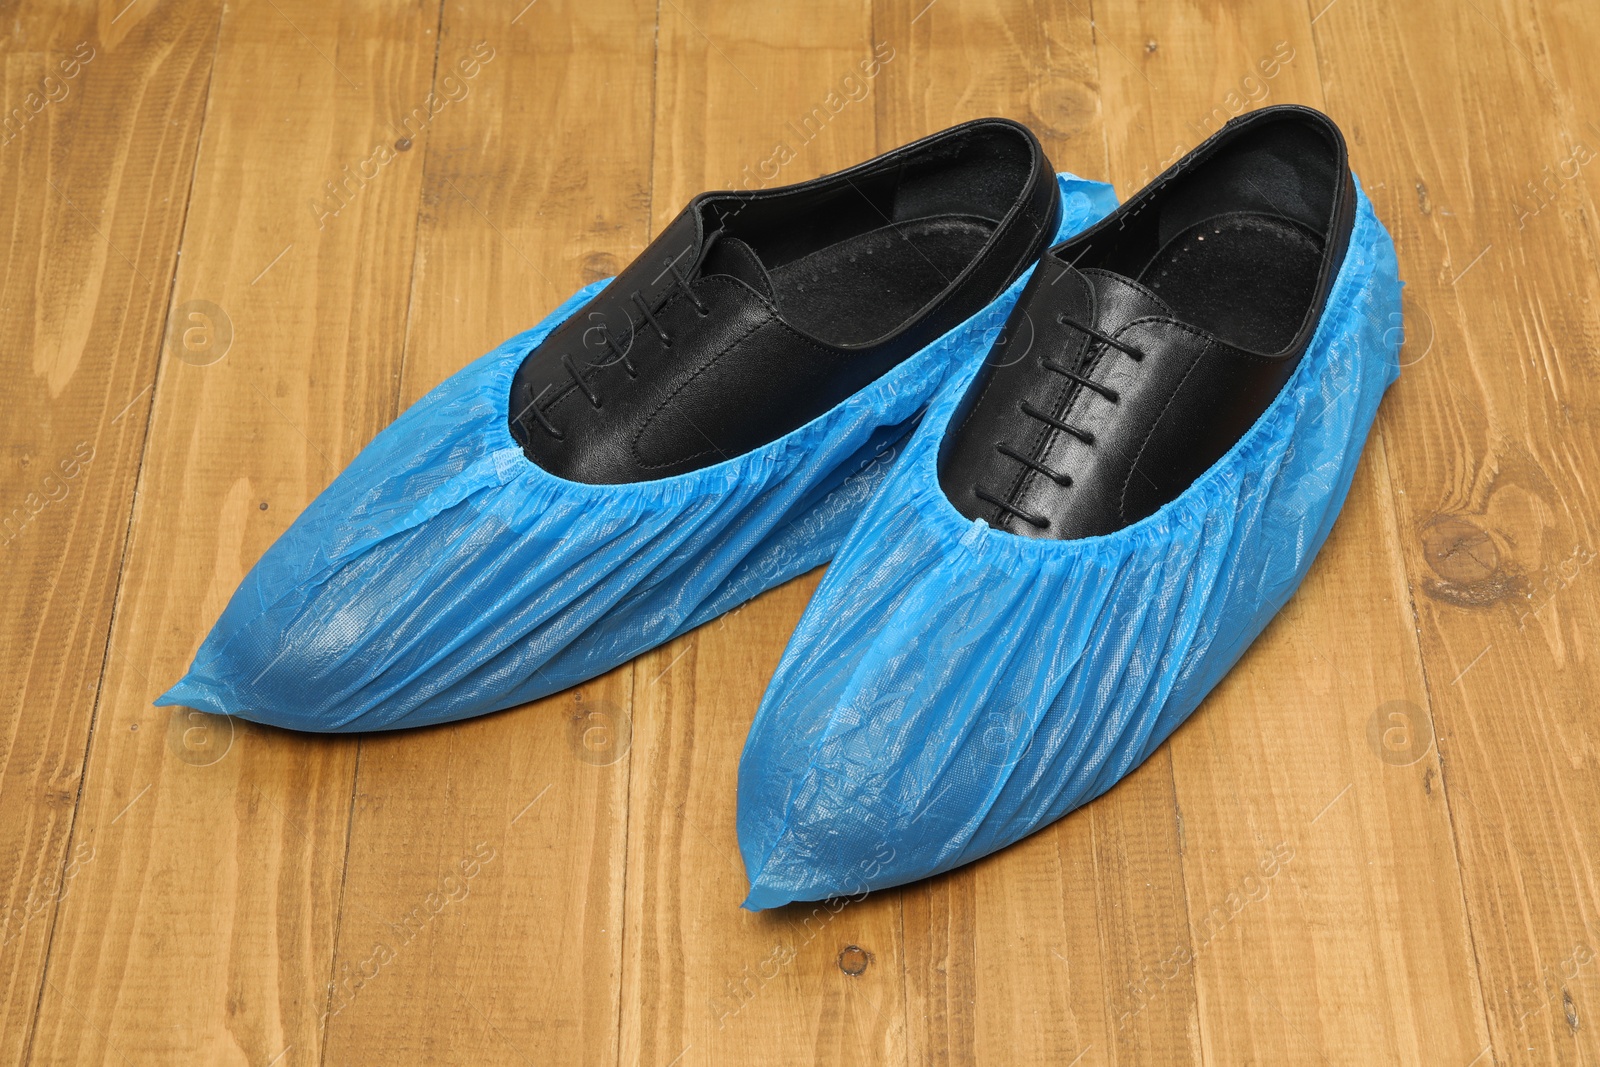 Photo of Men`s black shoes in blue shoe covers on wooden floor